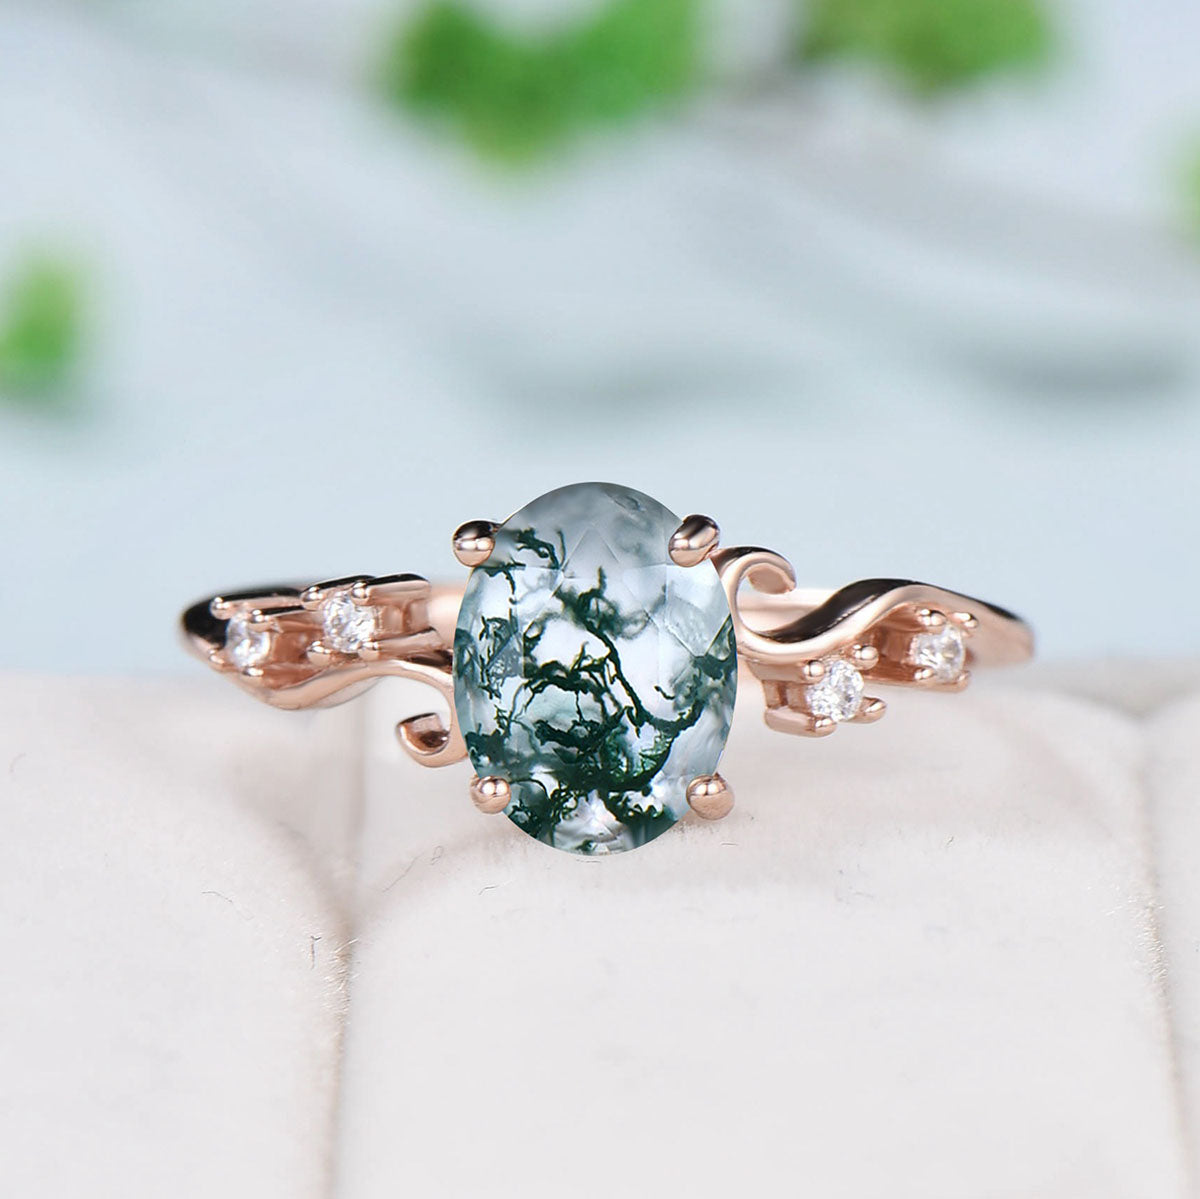 Retro Natural moss agate engagement ring set 1.5CT oval aquatic agate cluster diamond wedding ring set Vintage green crystal Proposal Gift - PENFINE